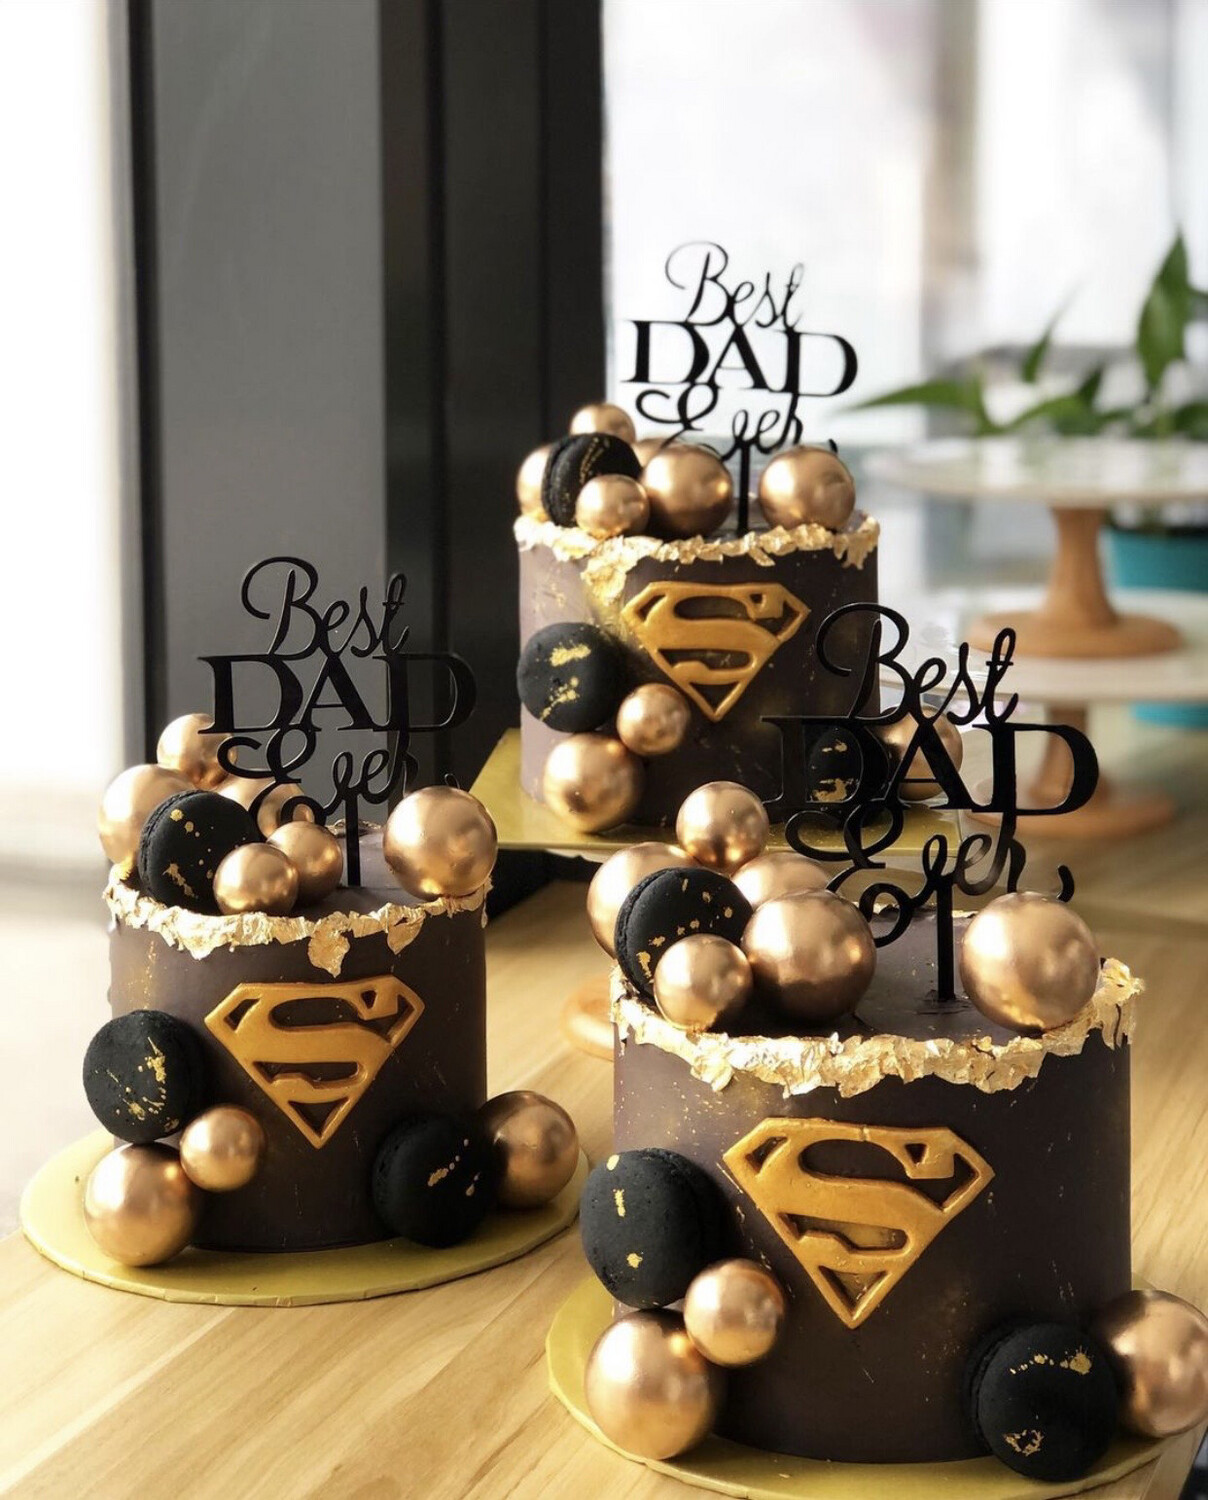 Fathers’ Day - Dad / Father Cake 1